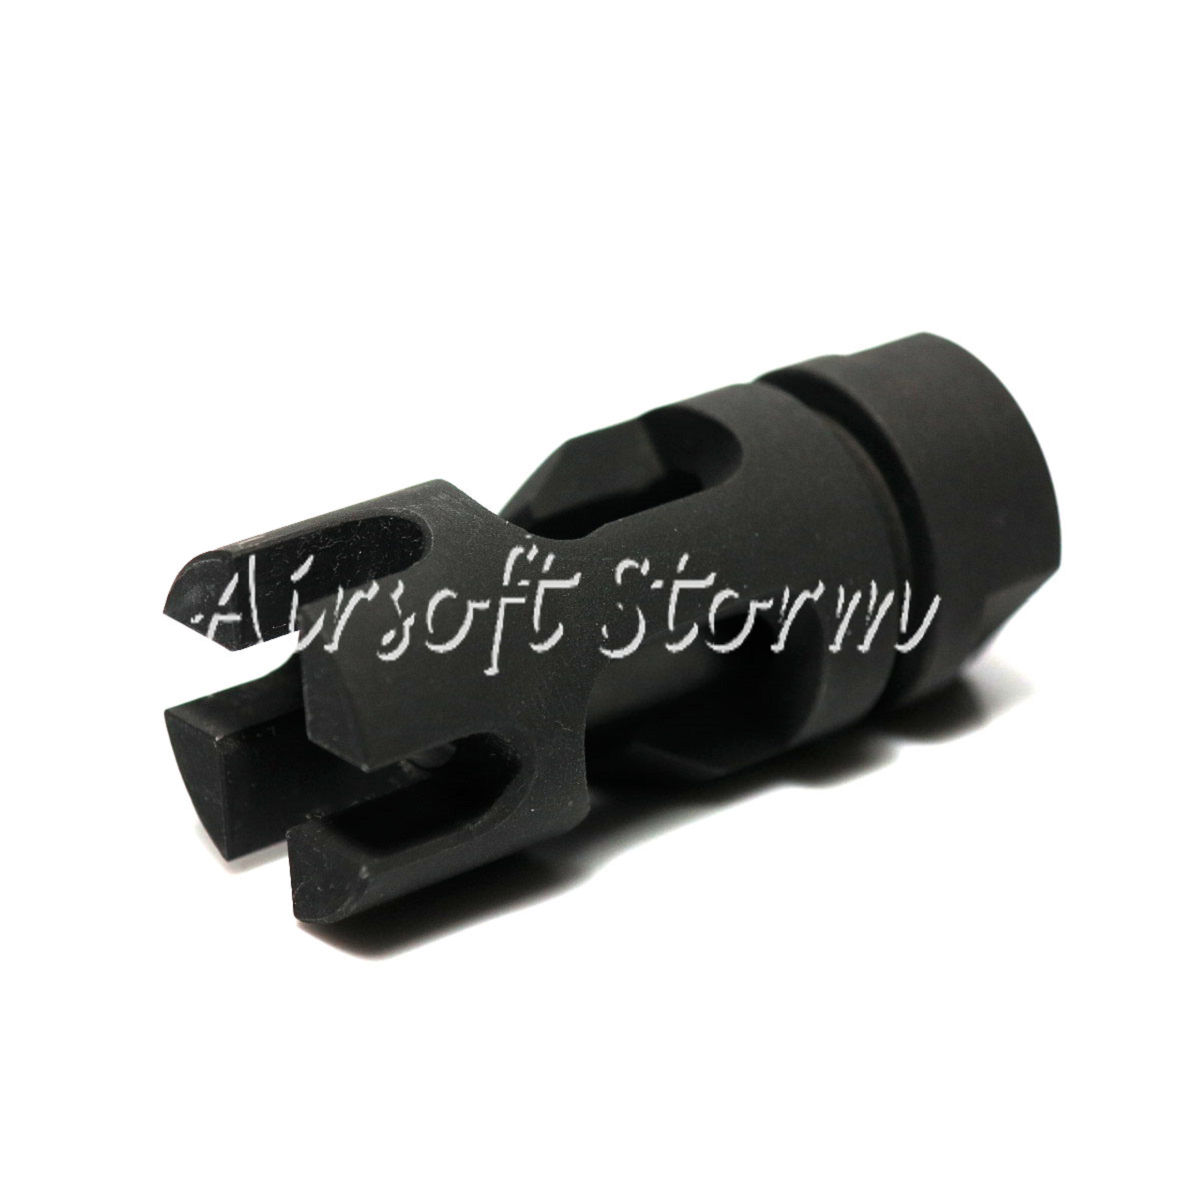 Shooting Gear Army Force PWS FSC556 Type Steel Flash Hider 14mm CCW Black - Click Image to Close